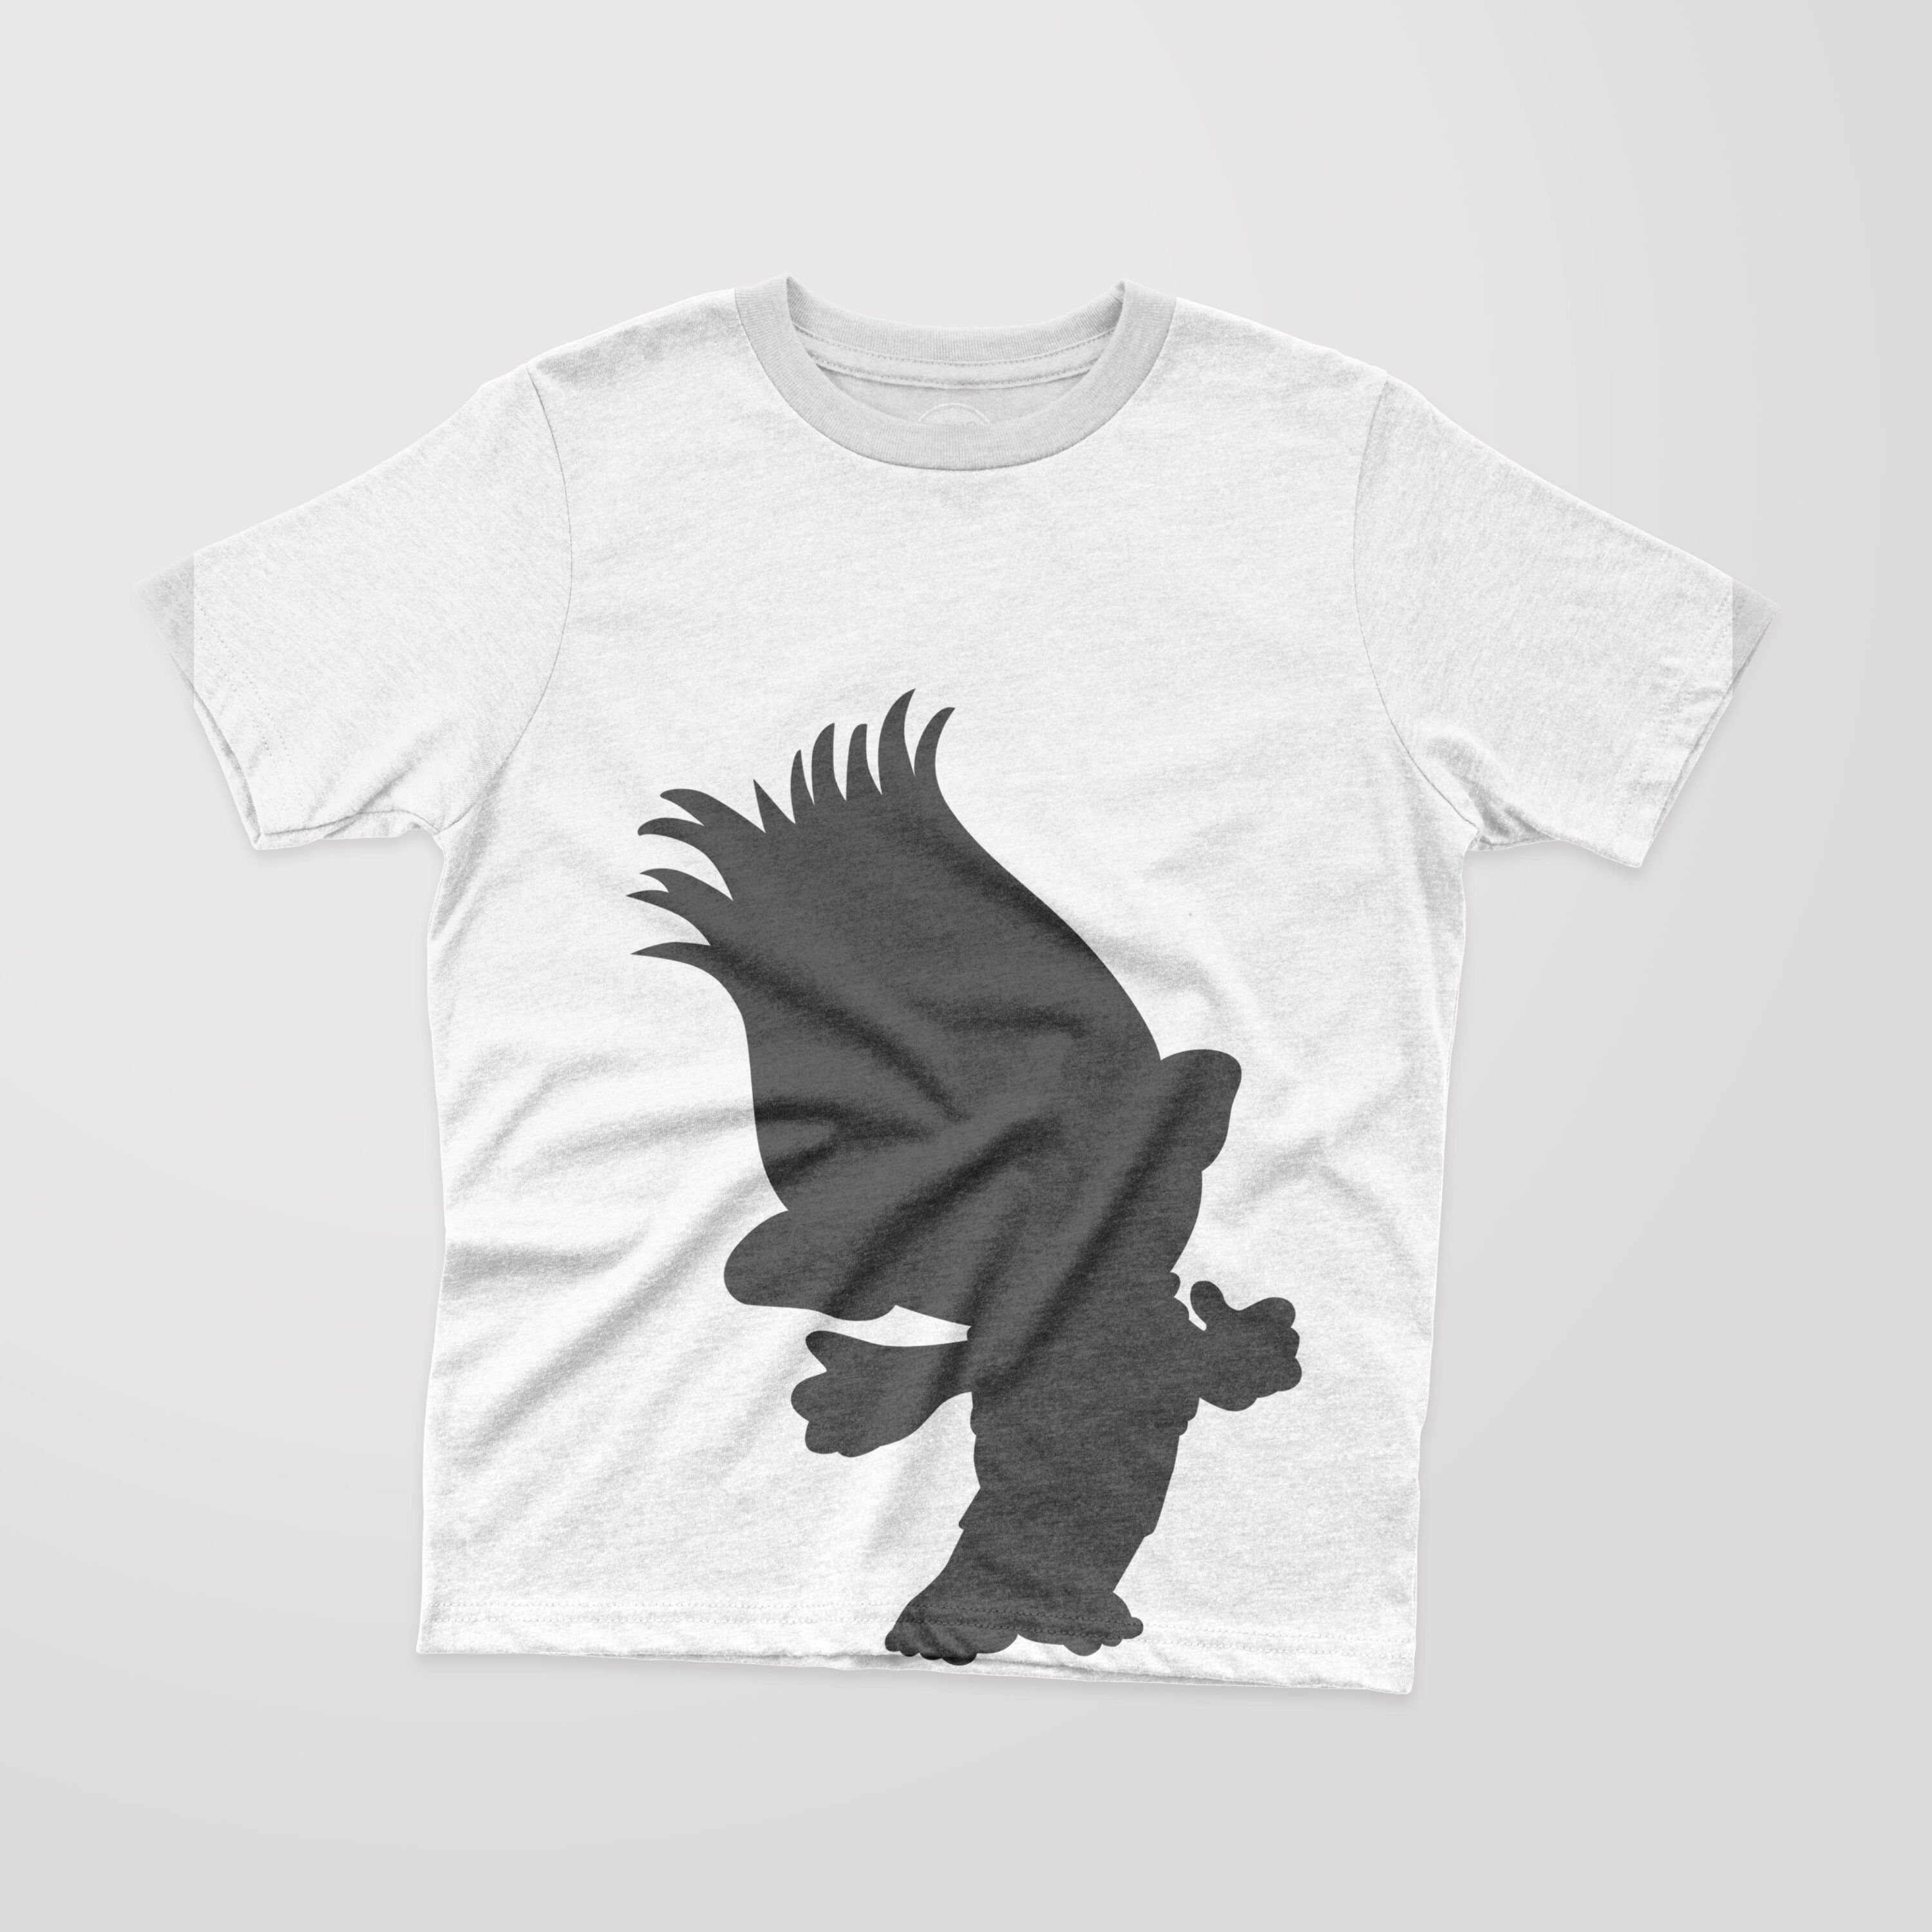 White T-shirt with a black silhouette of a cartoon character - Branch.